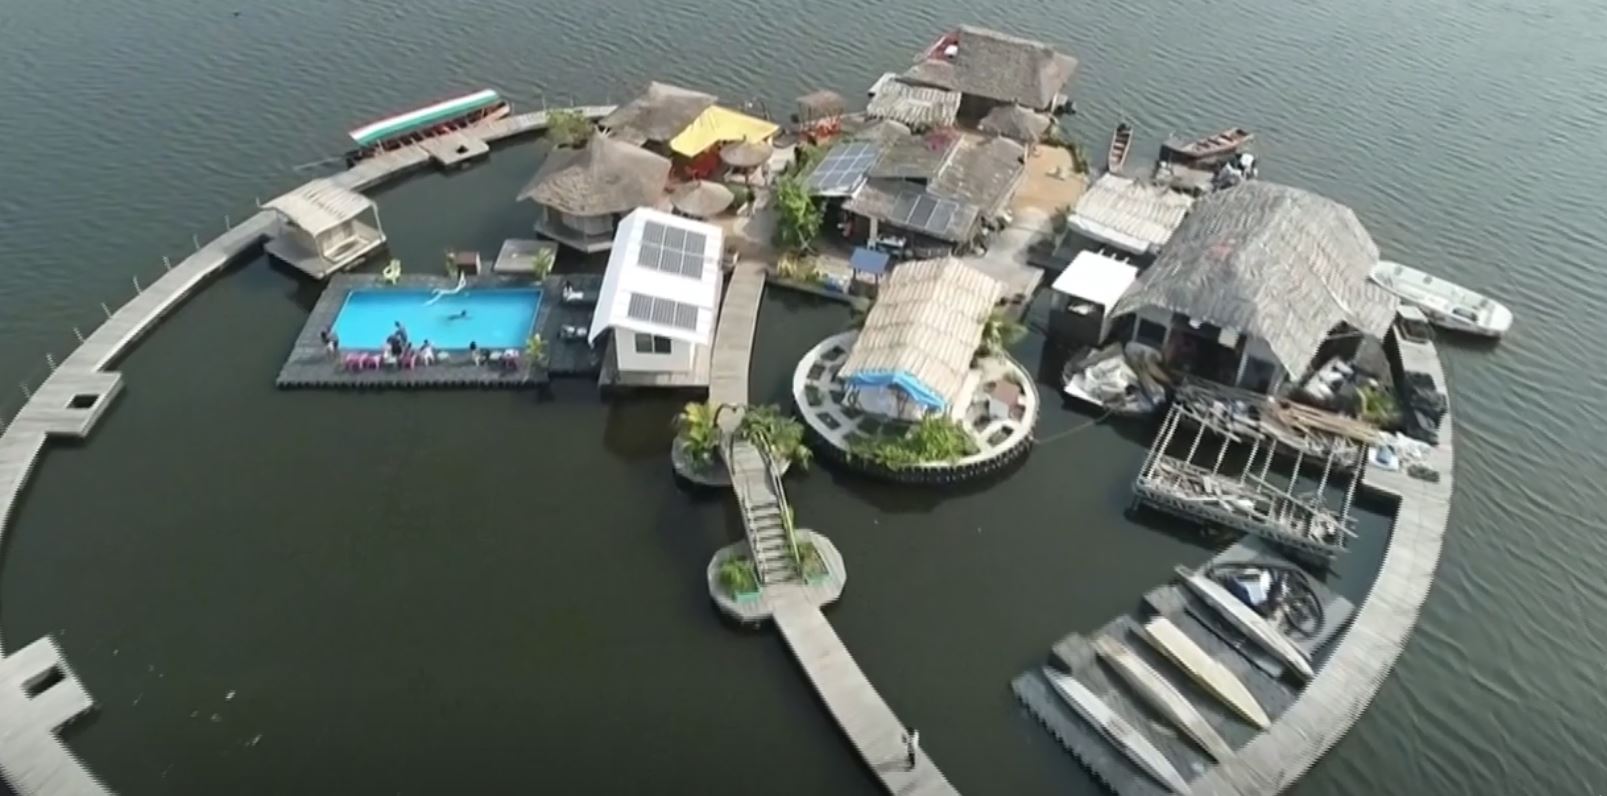 This island was built entirely from recycled plastic and trash